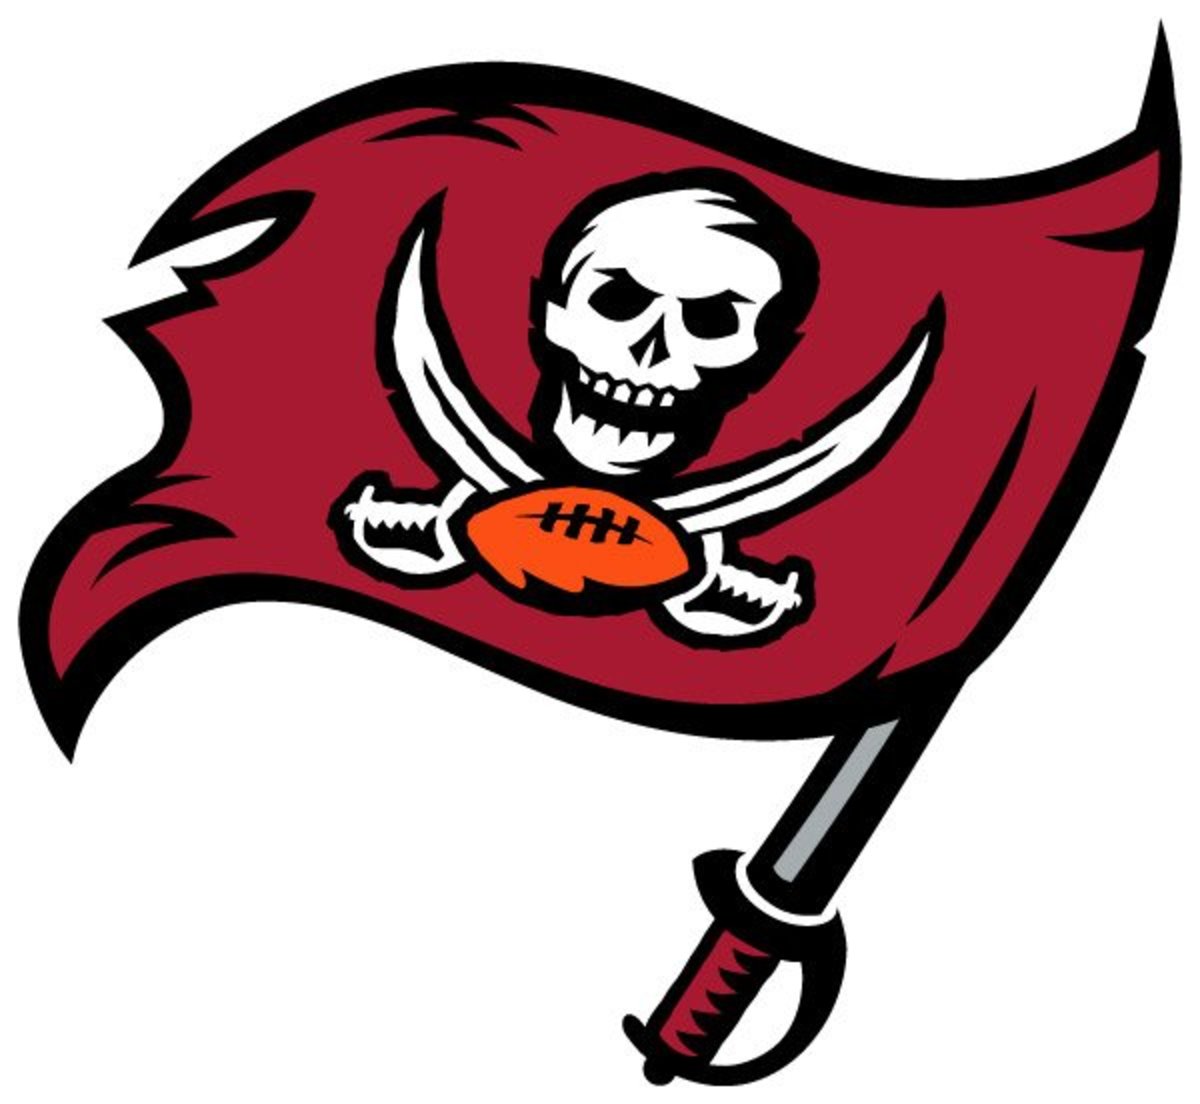 Tampa Bay Buccaneers Schedule 2022: Opponents and win-loss predictions